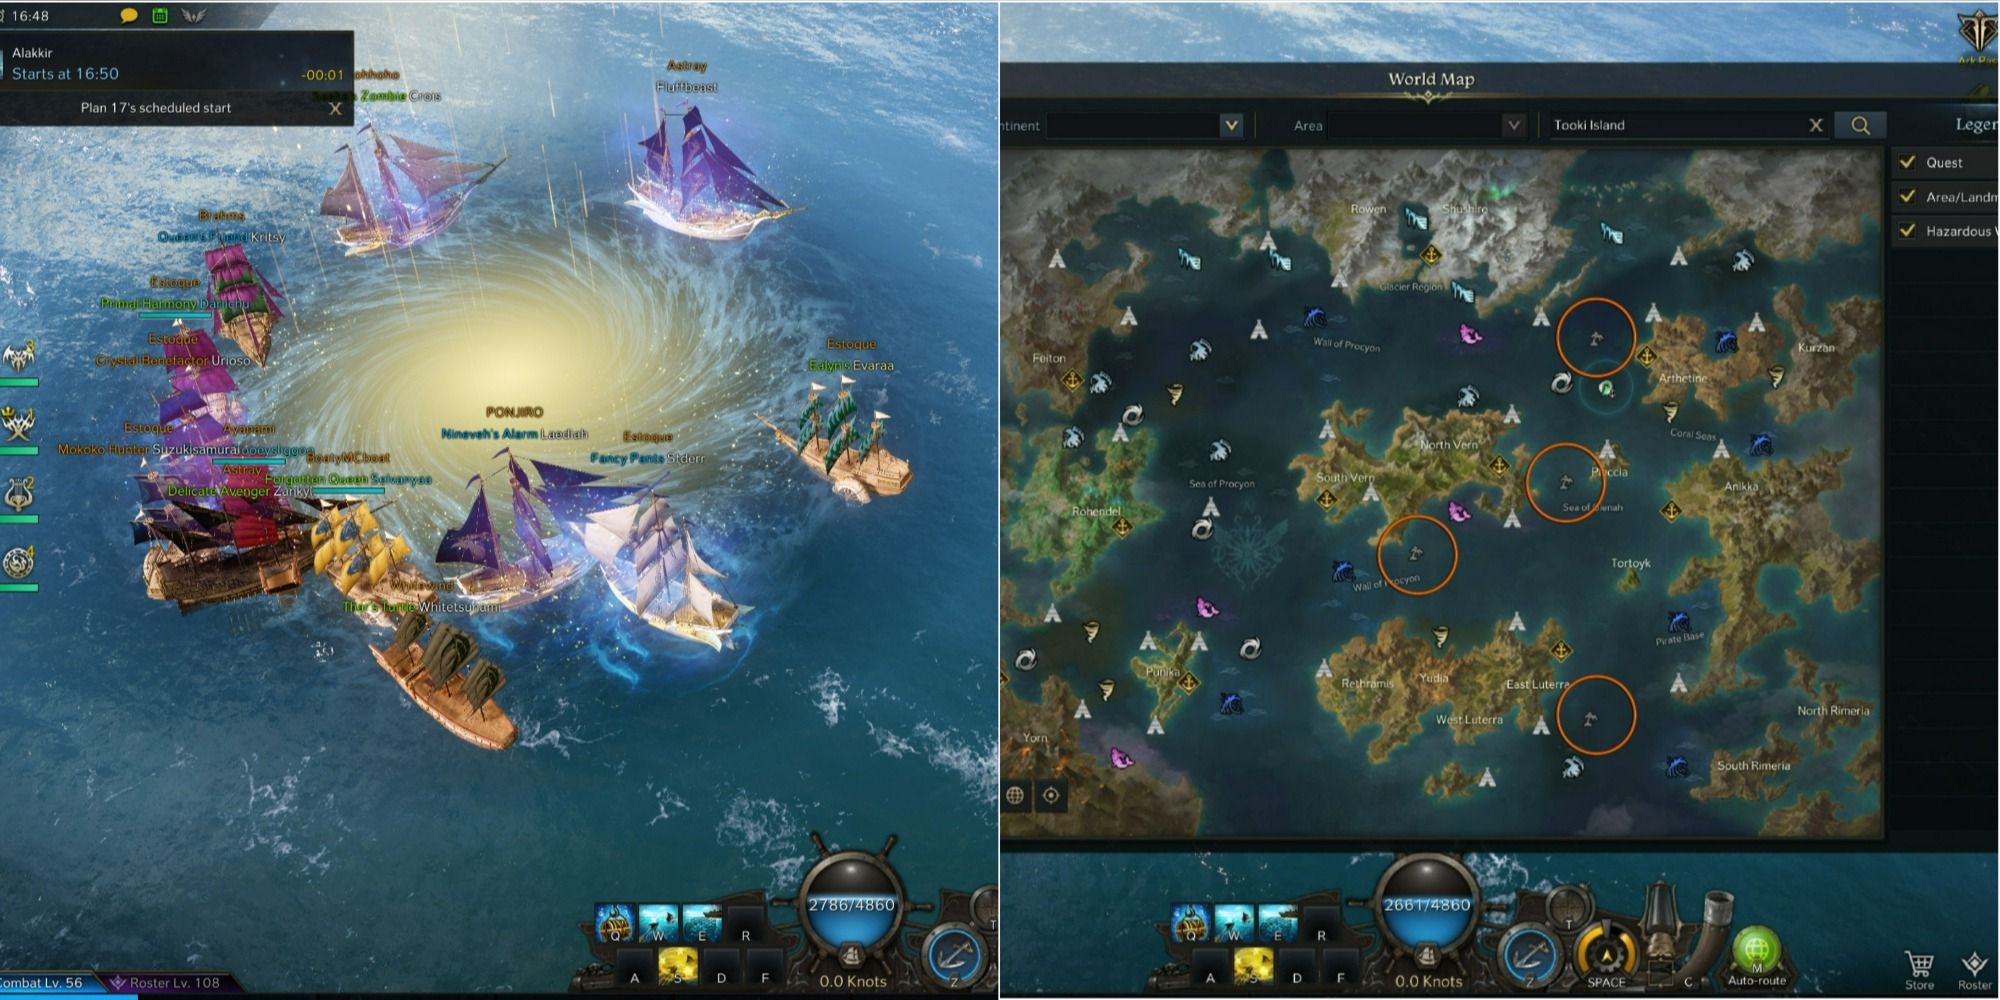 Lost Ark split image of Tooki Island spawning at sea and four map locations